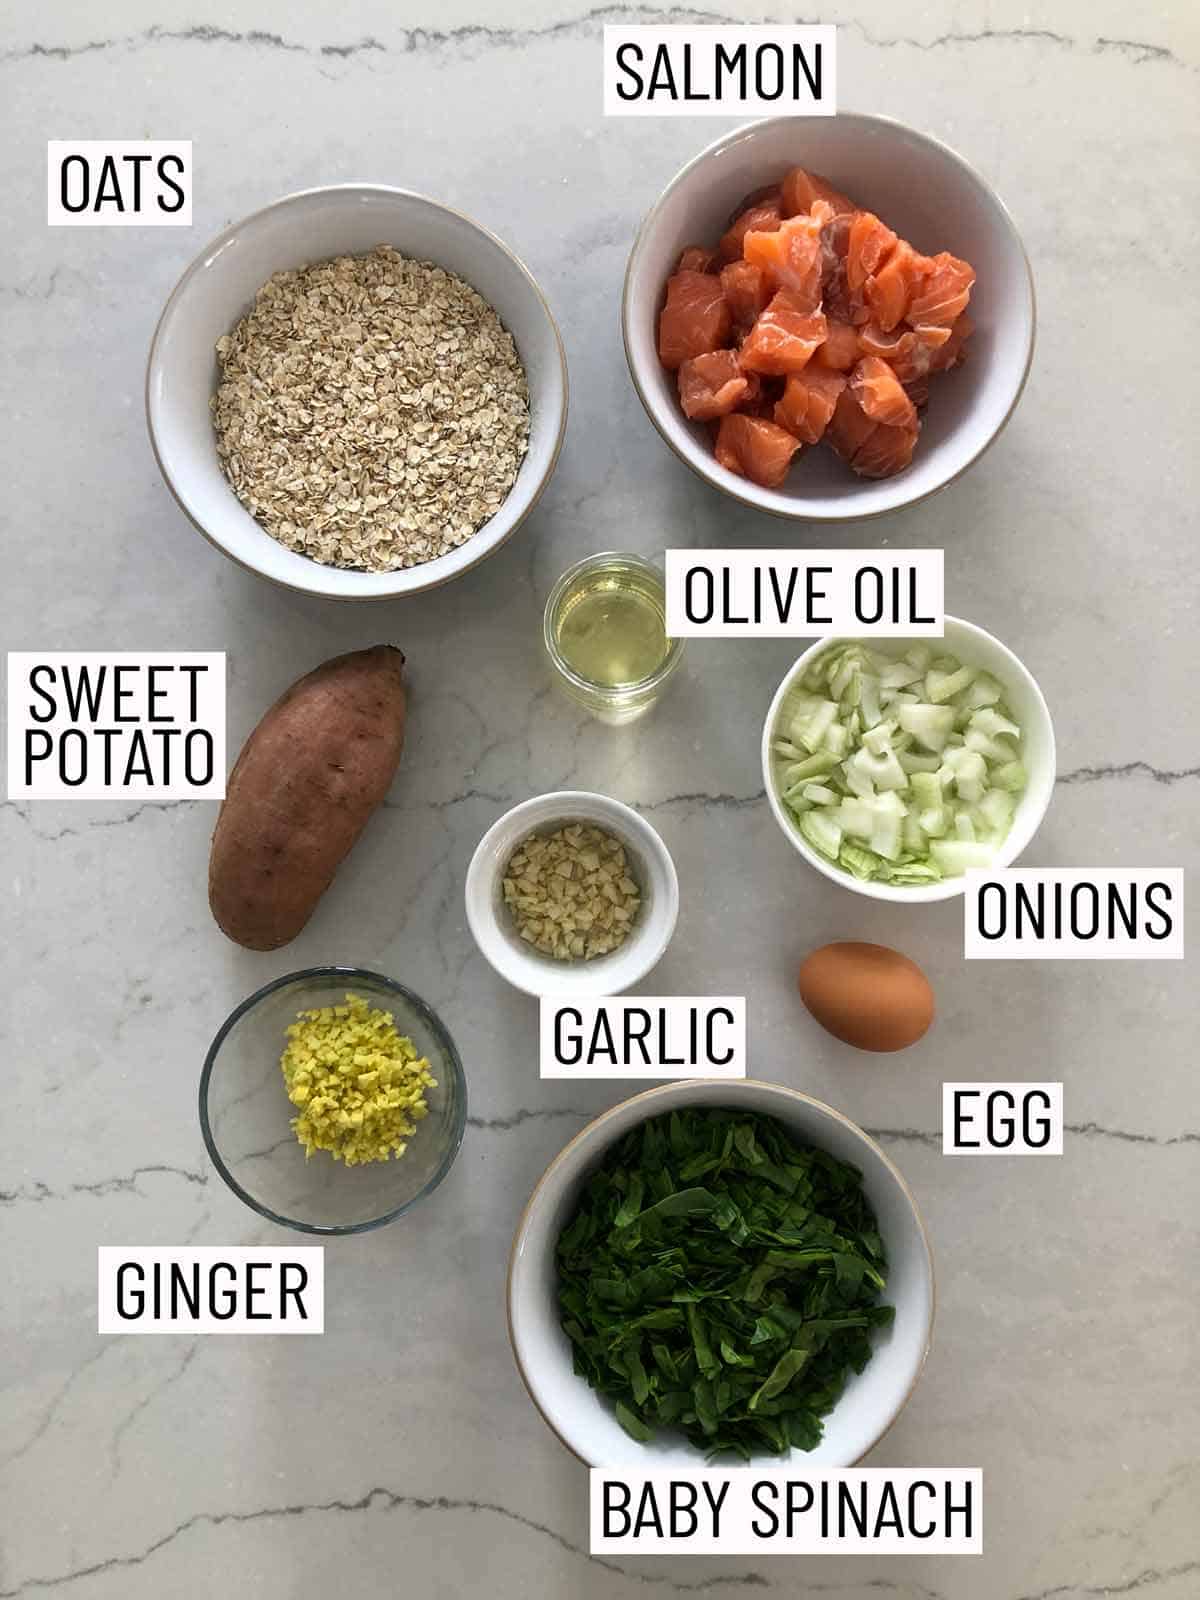 Overhead view of ingredients needed to make salmon fritters.